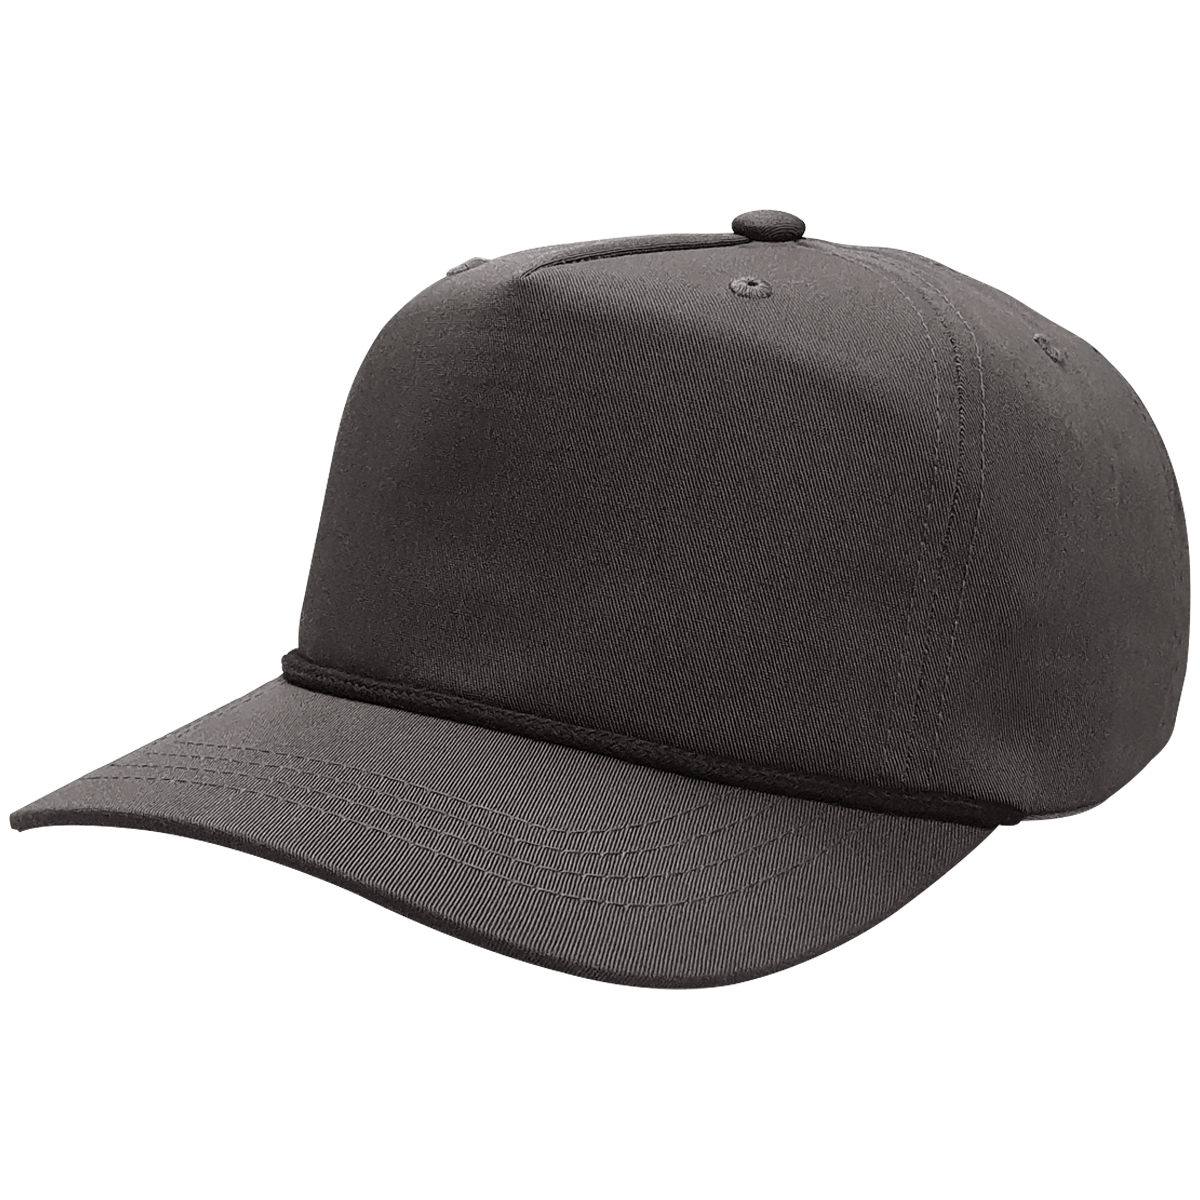 5 Panel Soft Structured with Stay Front - 8805